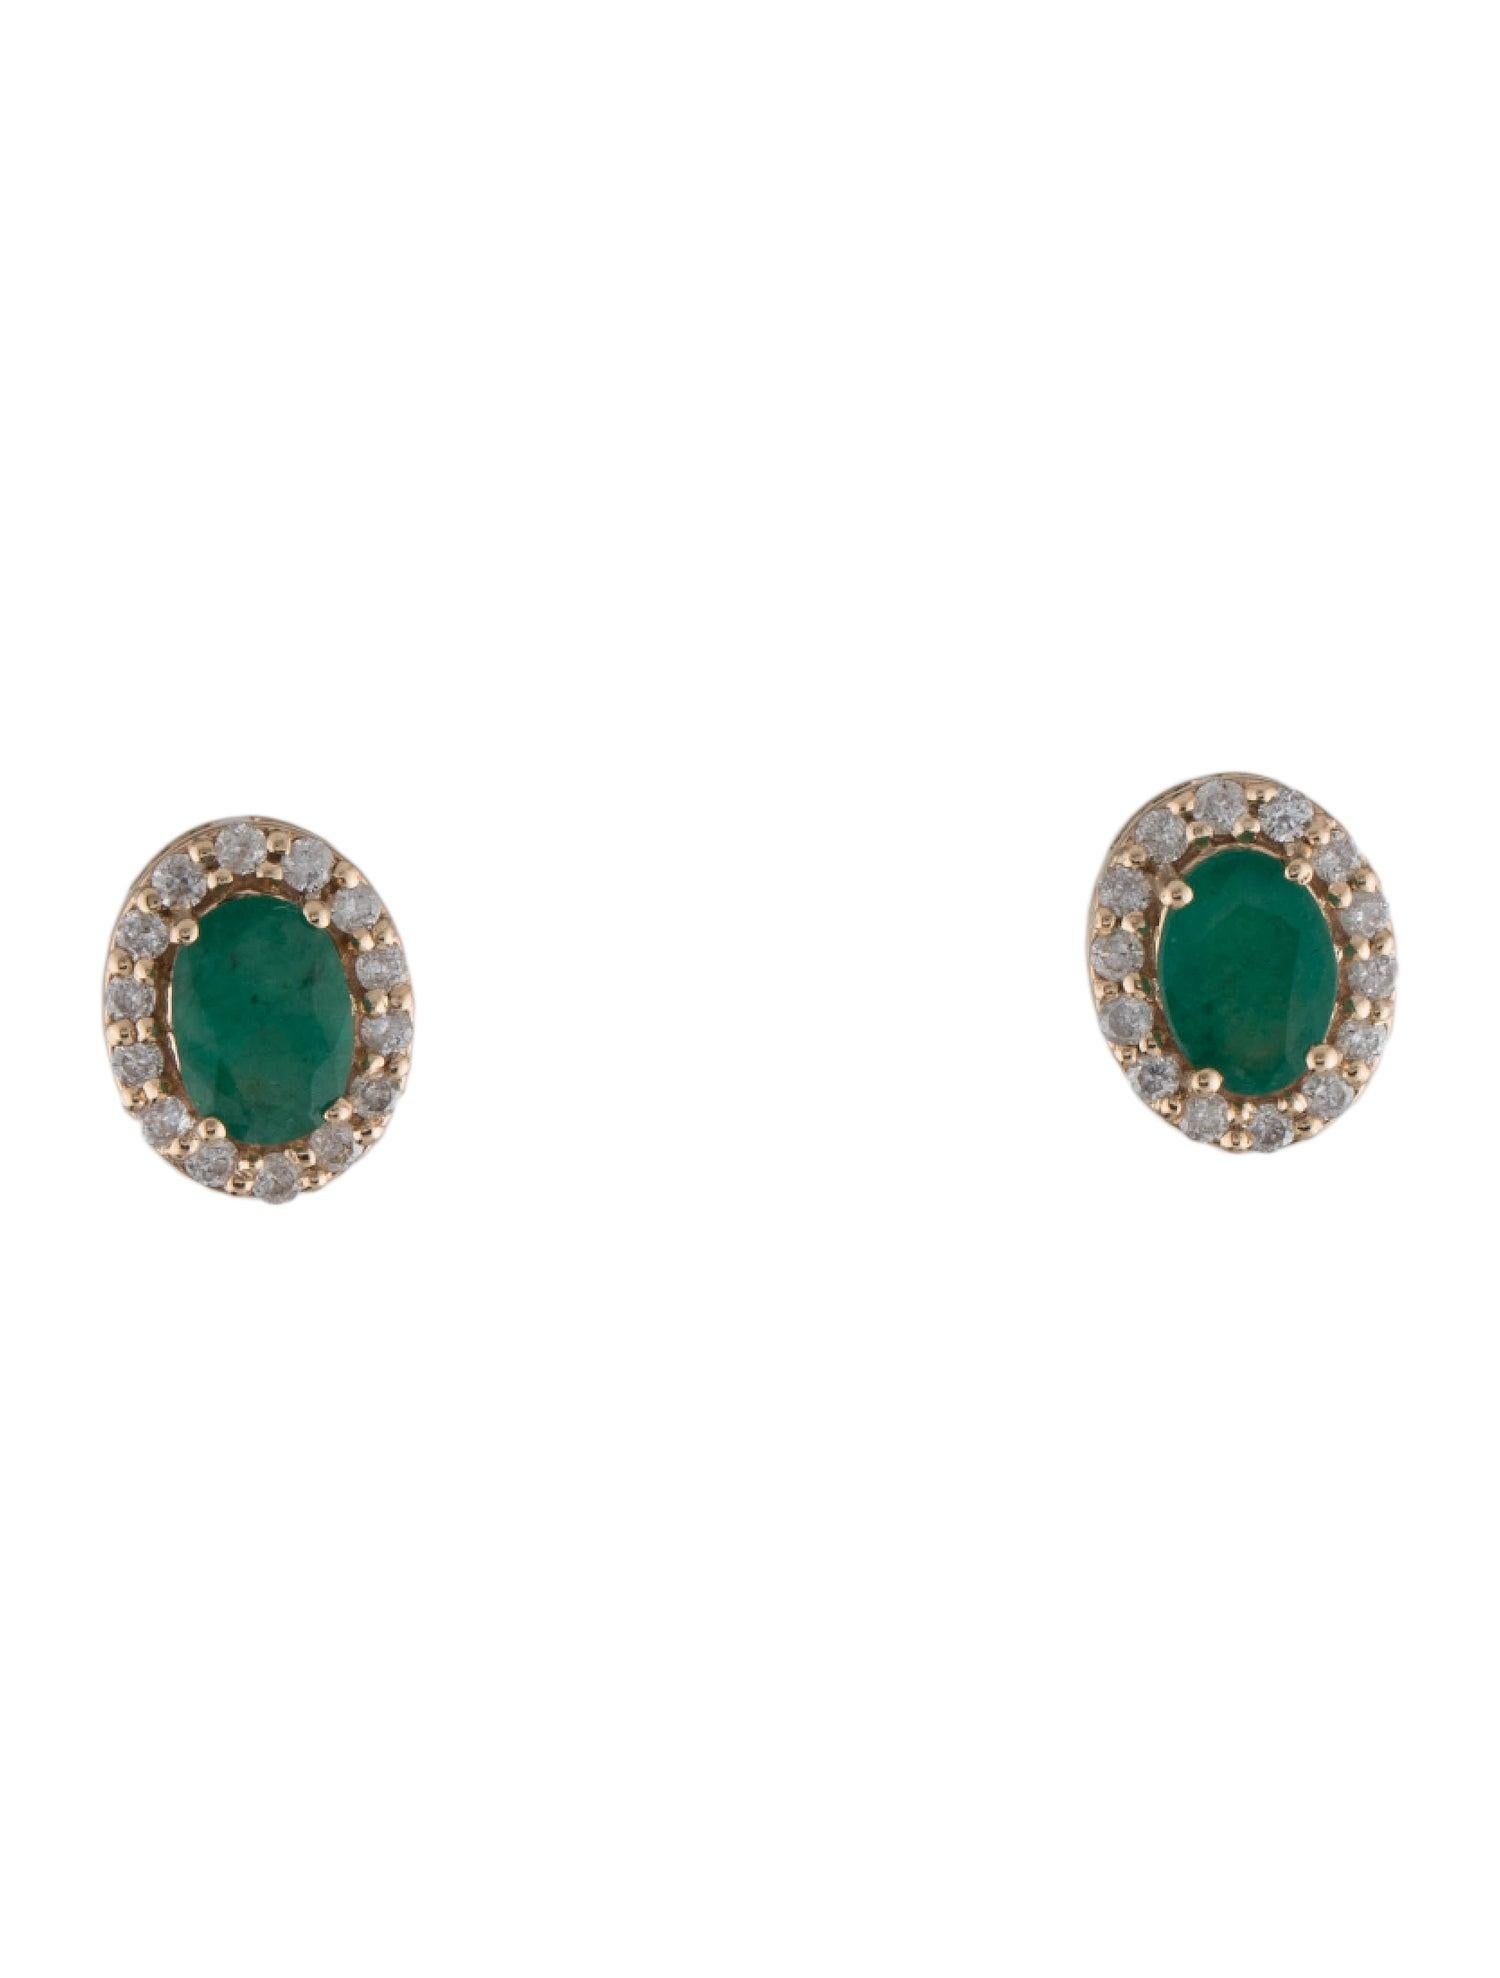 14K Emerald & Diamond Stud Earrings - Exquisite Gemstone Jewelry & Timeless In New Condition For Sale In Holtsville, NY